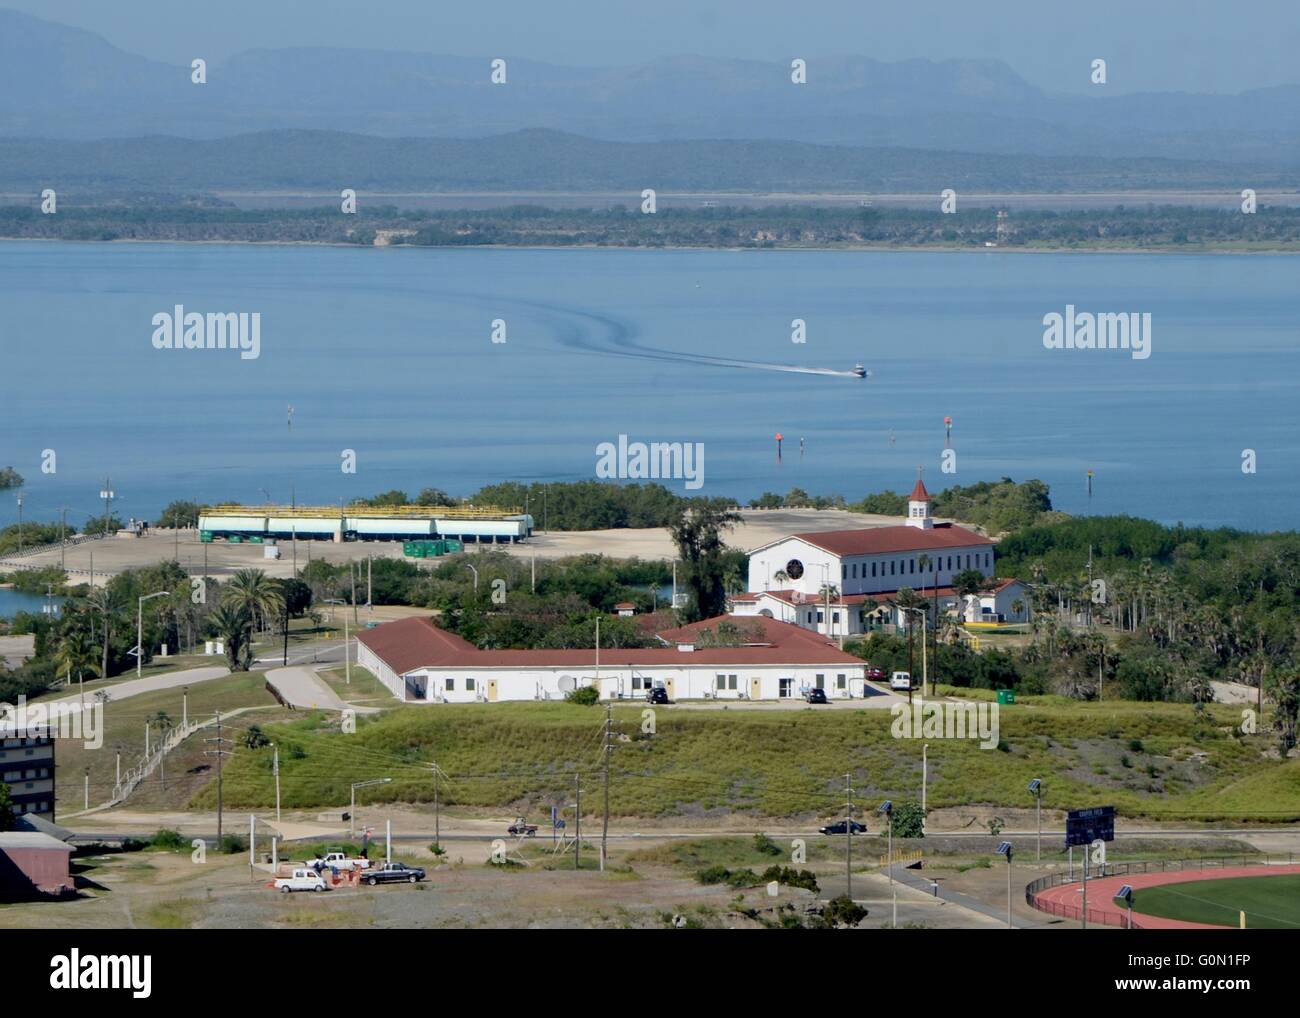 View of the chapel and Havana harbor seen from John Paul Jones Hill at Naval Station Guantanamo Bay December 15, 2015 in Guantanamo Bay, Cuba. Naval Station Guantanamo Bay was established in 1903, making it the oldest overseas naval installation in operation. Stock Photo